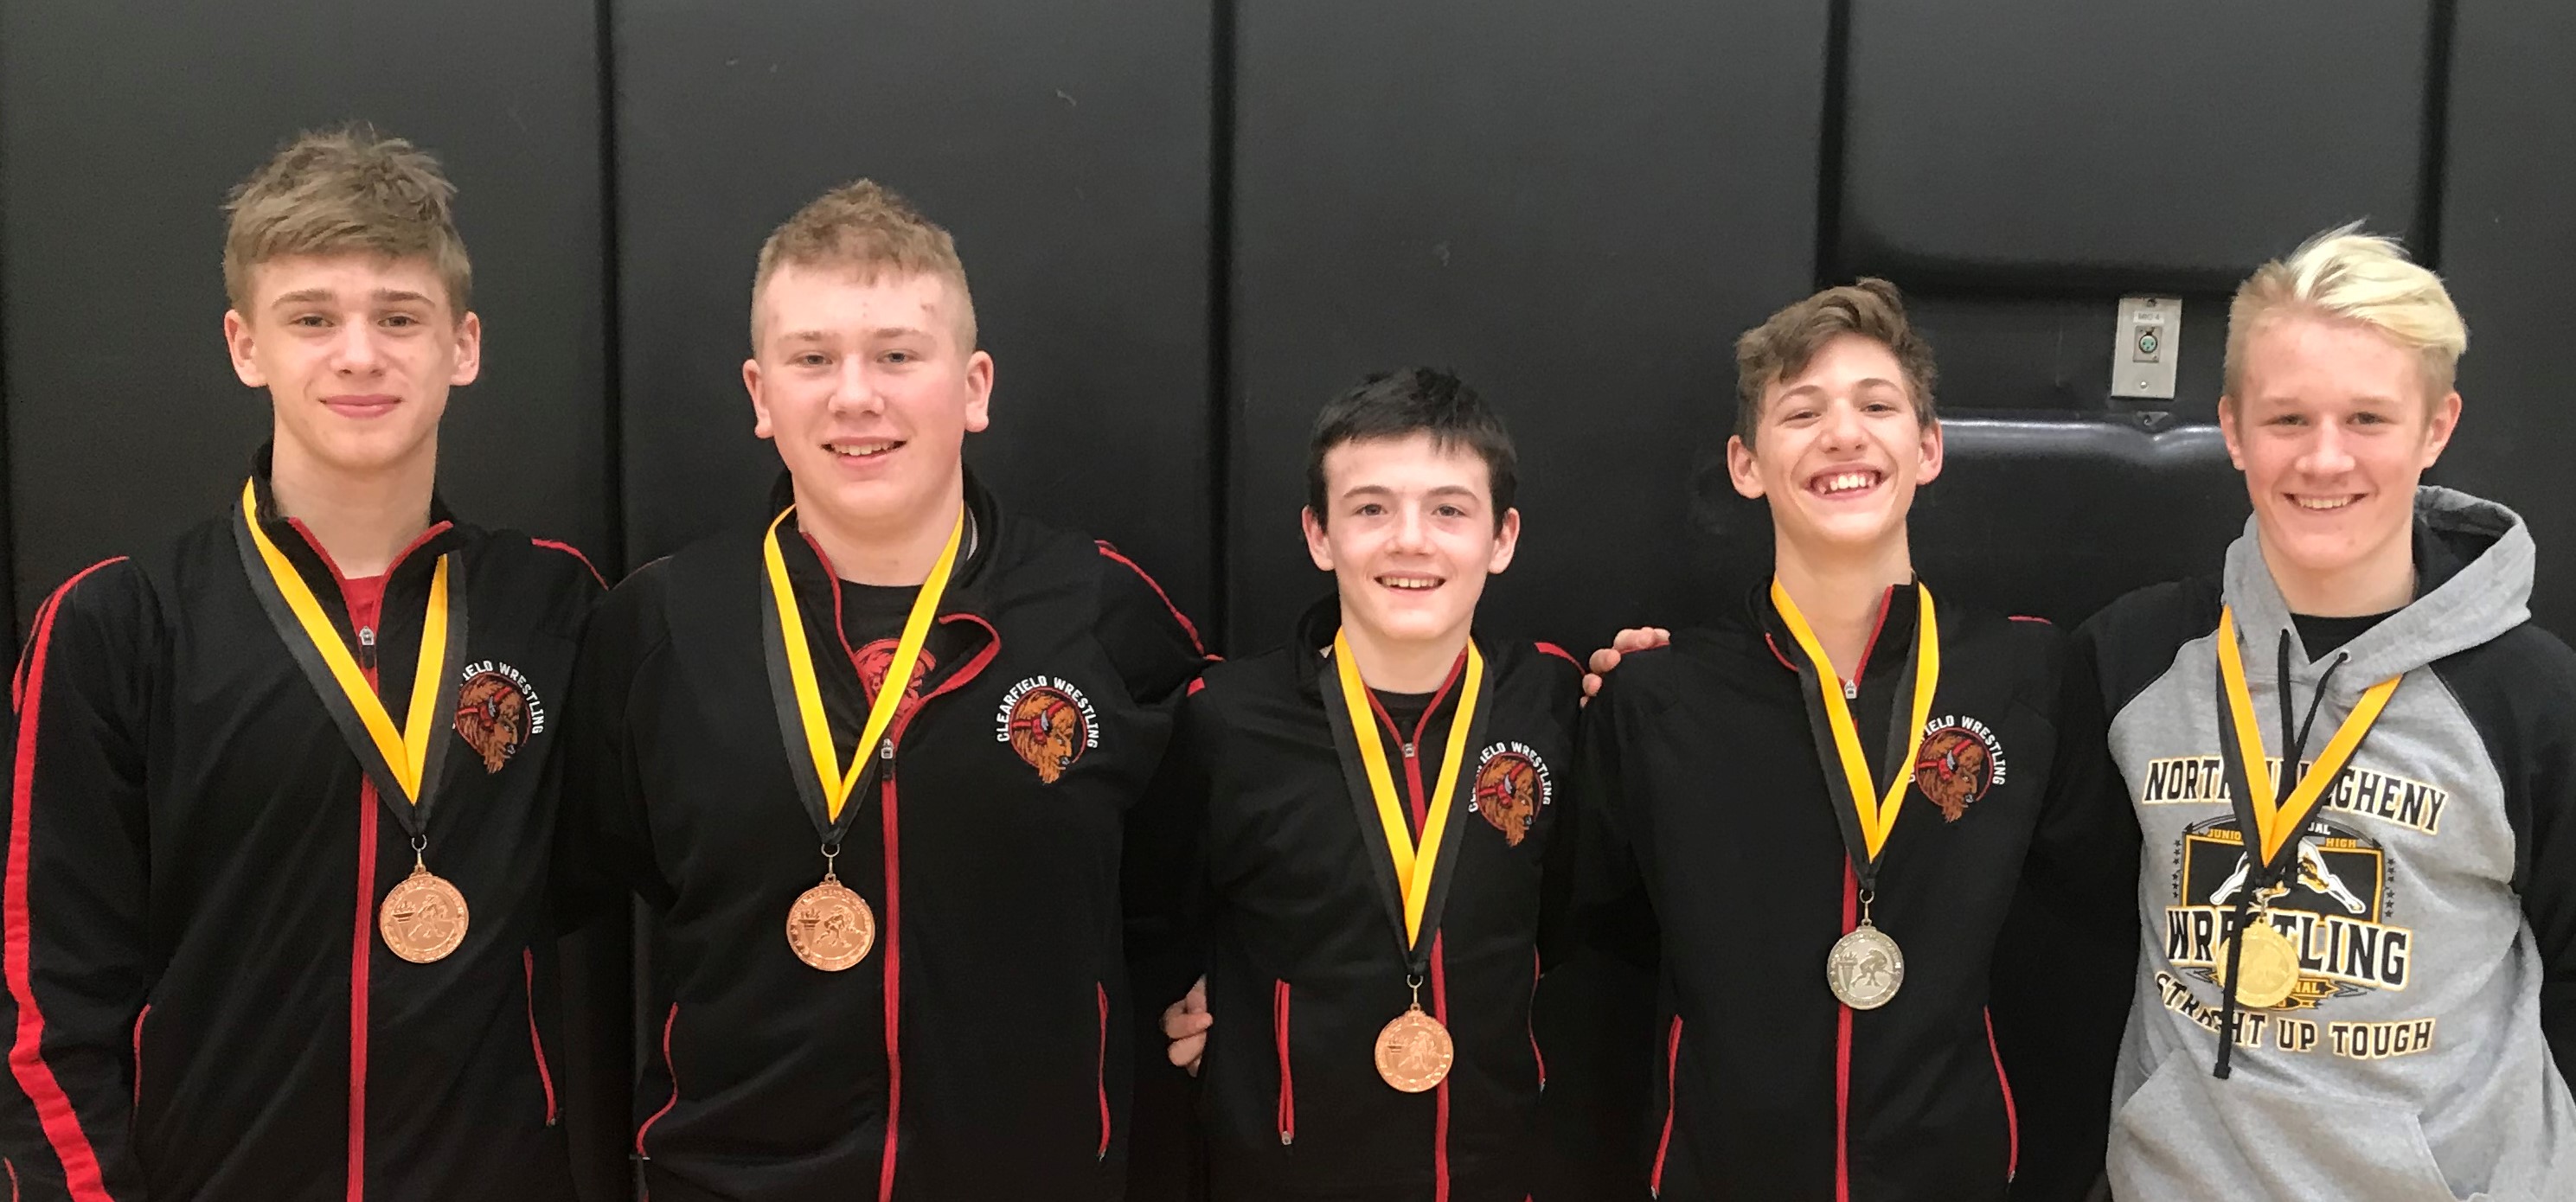 Clearfield had 5 individual place winners. The Bison place winners were L to R in picture, Patrick Knepp (6th/ 138lbs), Eric Meyers (4th /210lbs), Brady Collins (3rd/101 lbs), Will Domico (2nd/130lbs), and Carter Chamberlain (1st place /170 lbs).